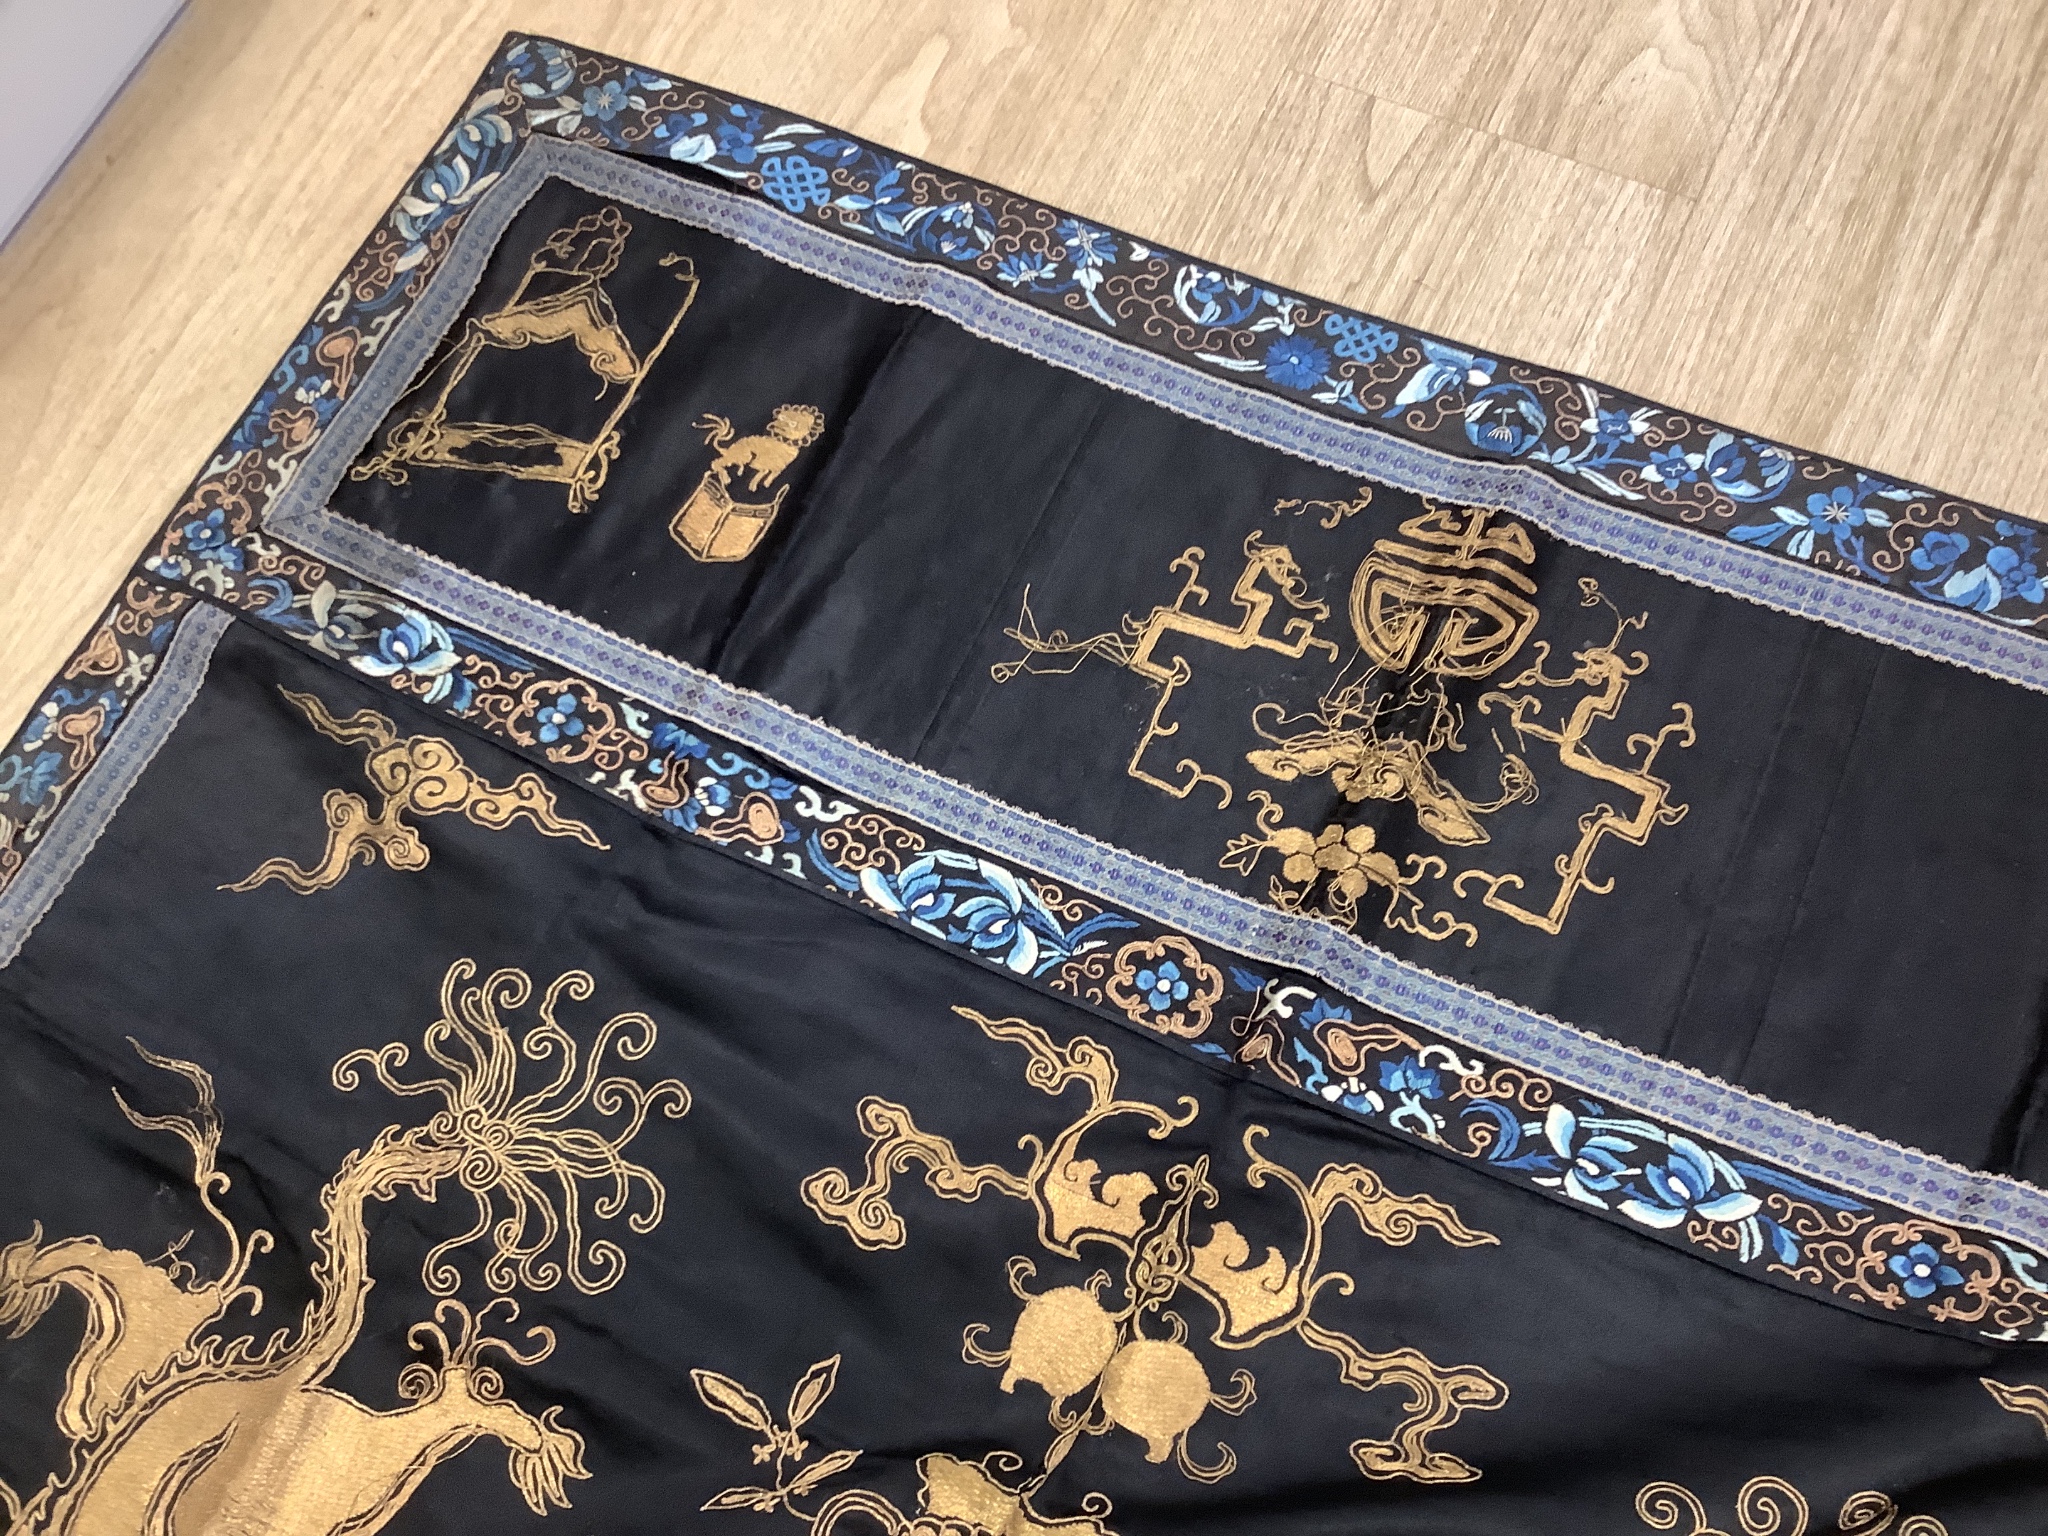 A 19th century Chinese dark blue ground panel, gilt thread embroidered with a pair of celestial dragons flying amongst precious objects, beneath a frieze, 95 x 95cm